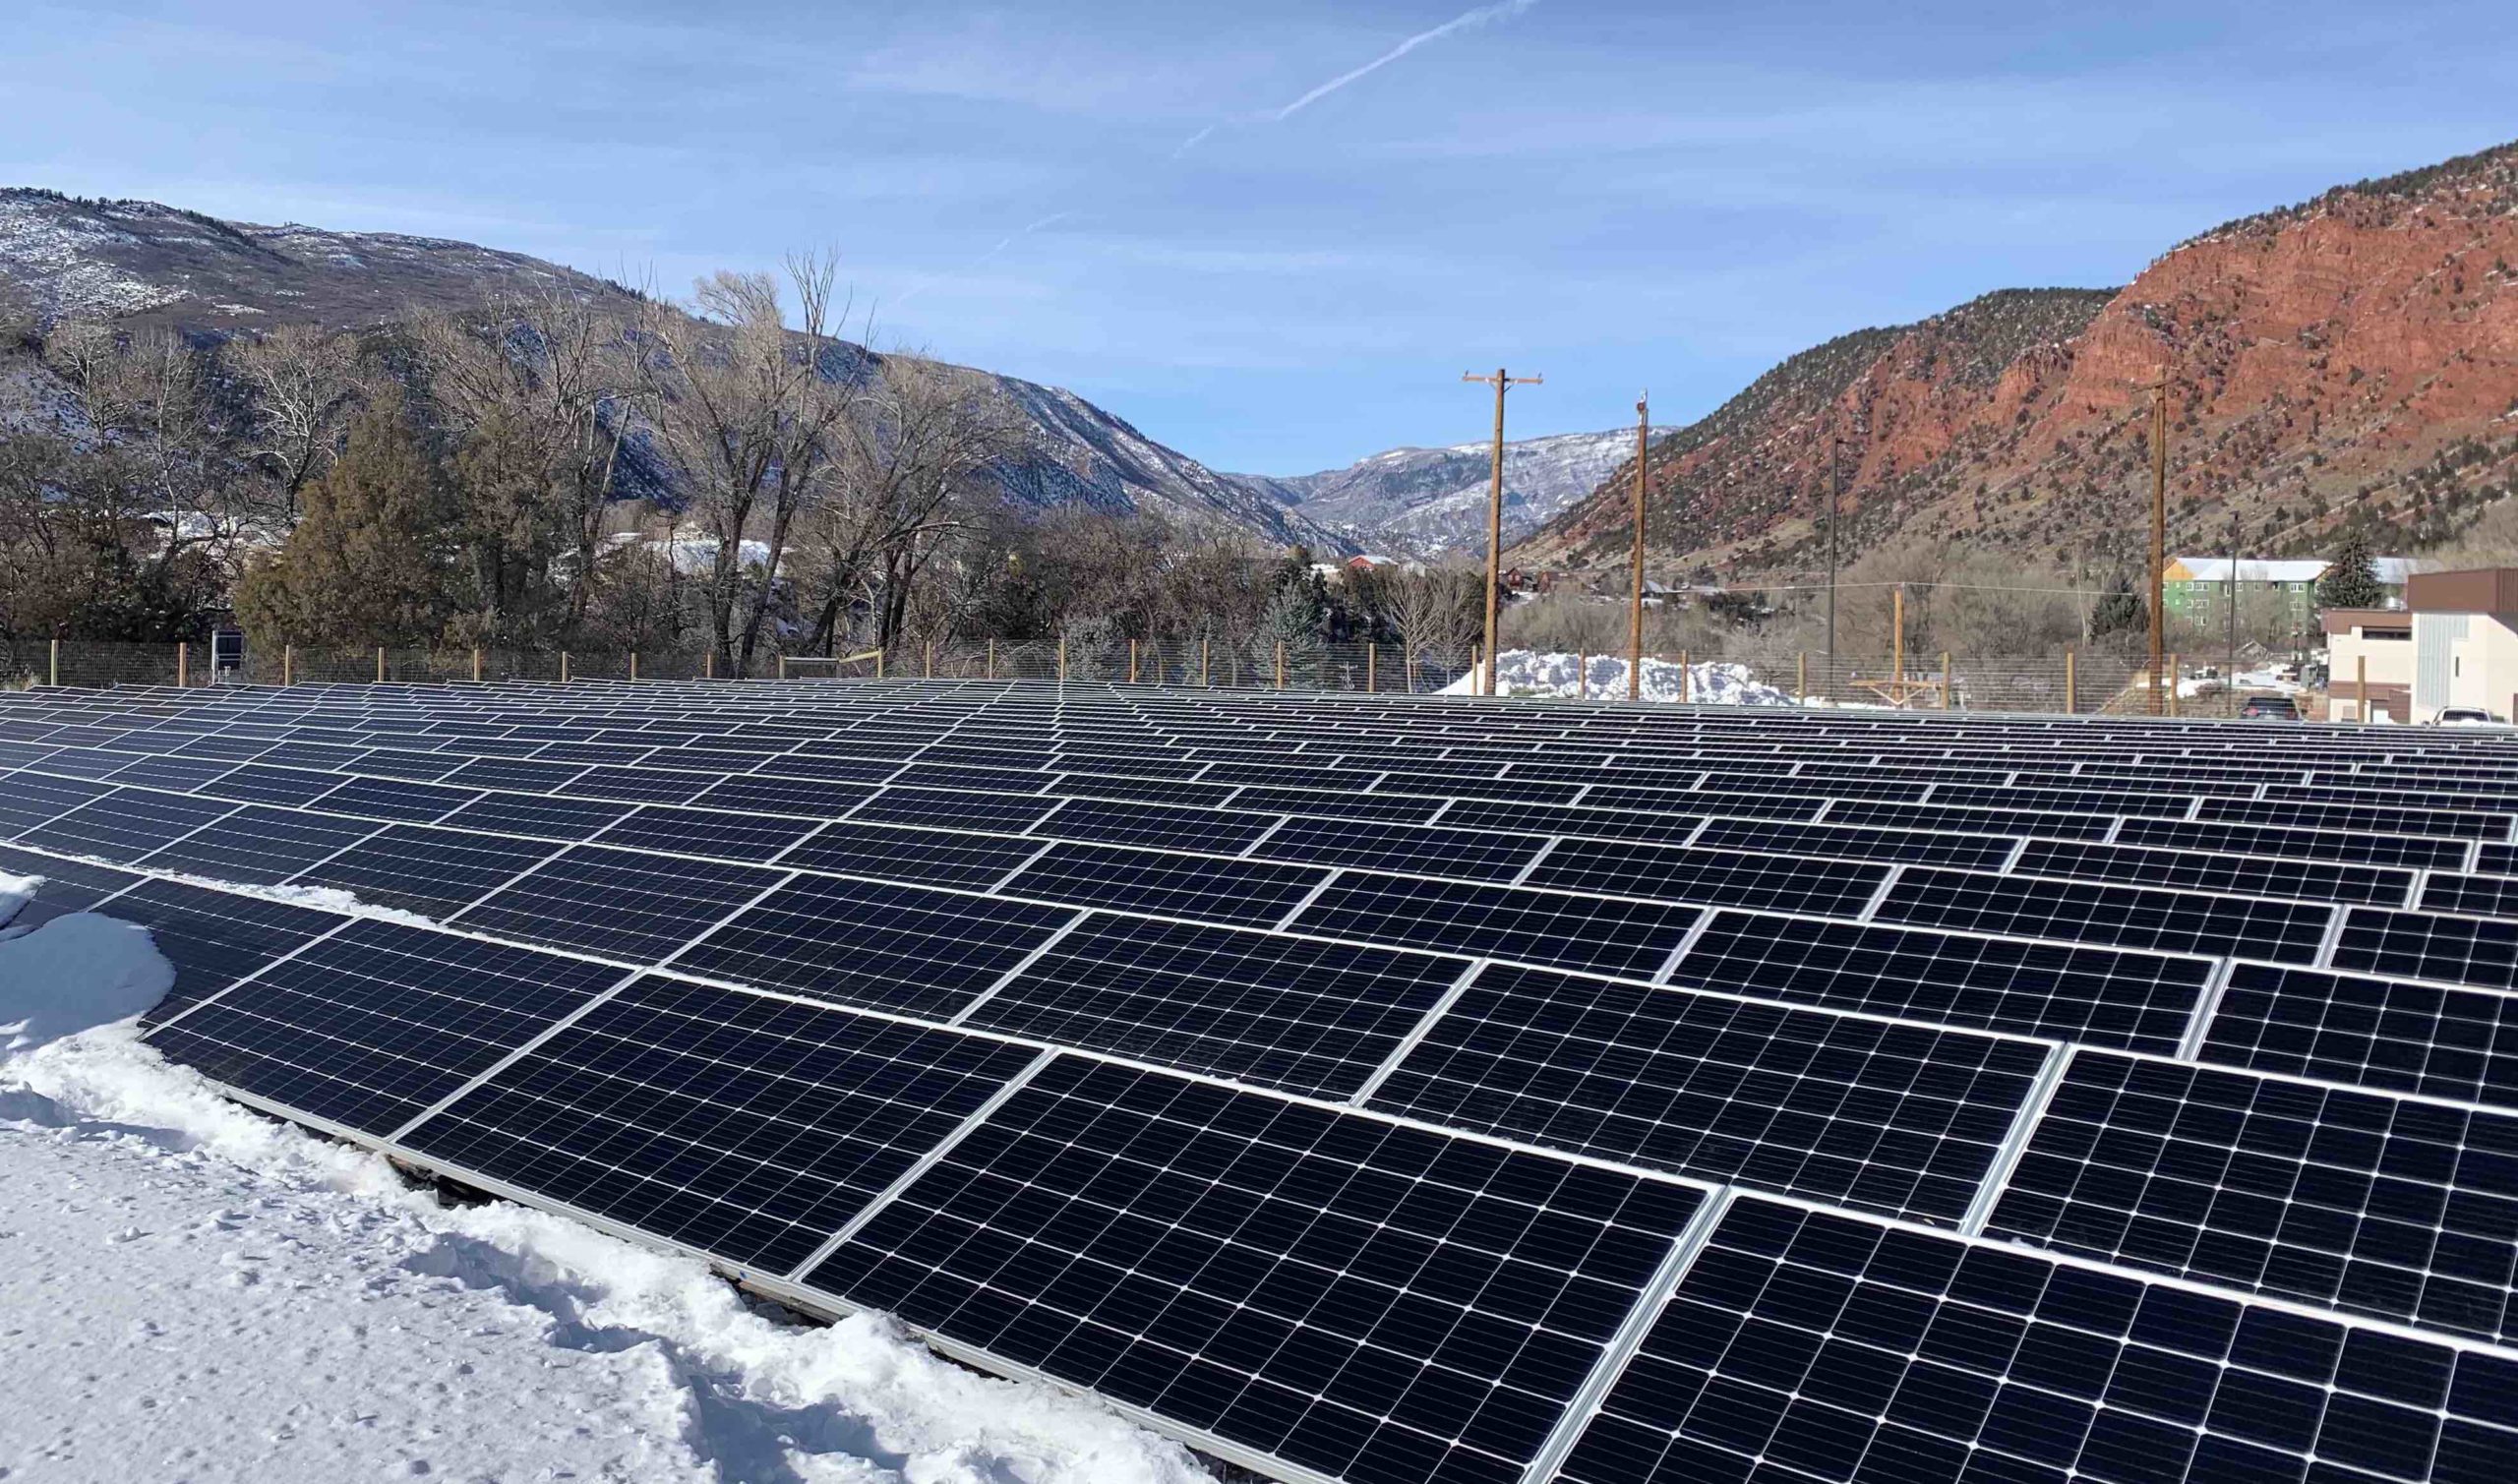 Exactly what was needed by Holy Cross Energy: a semi-temporary solar farm